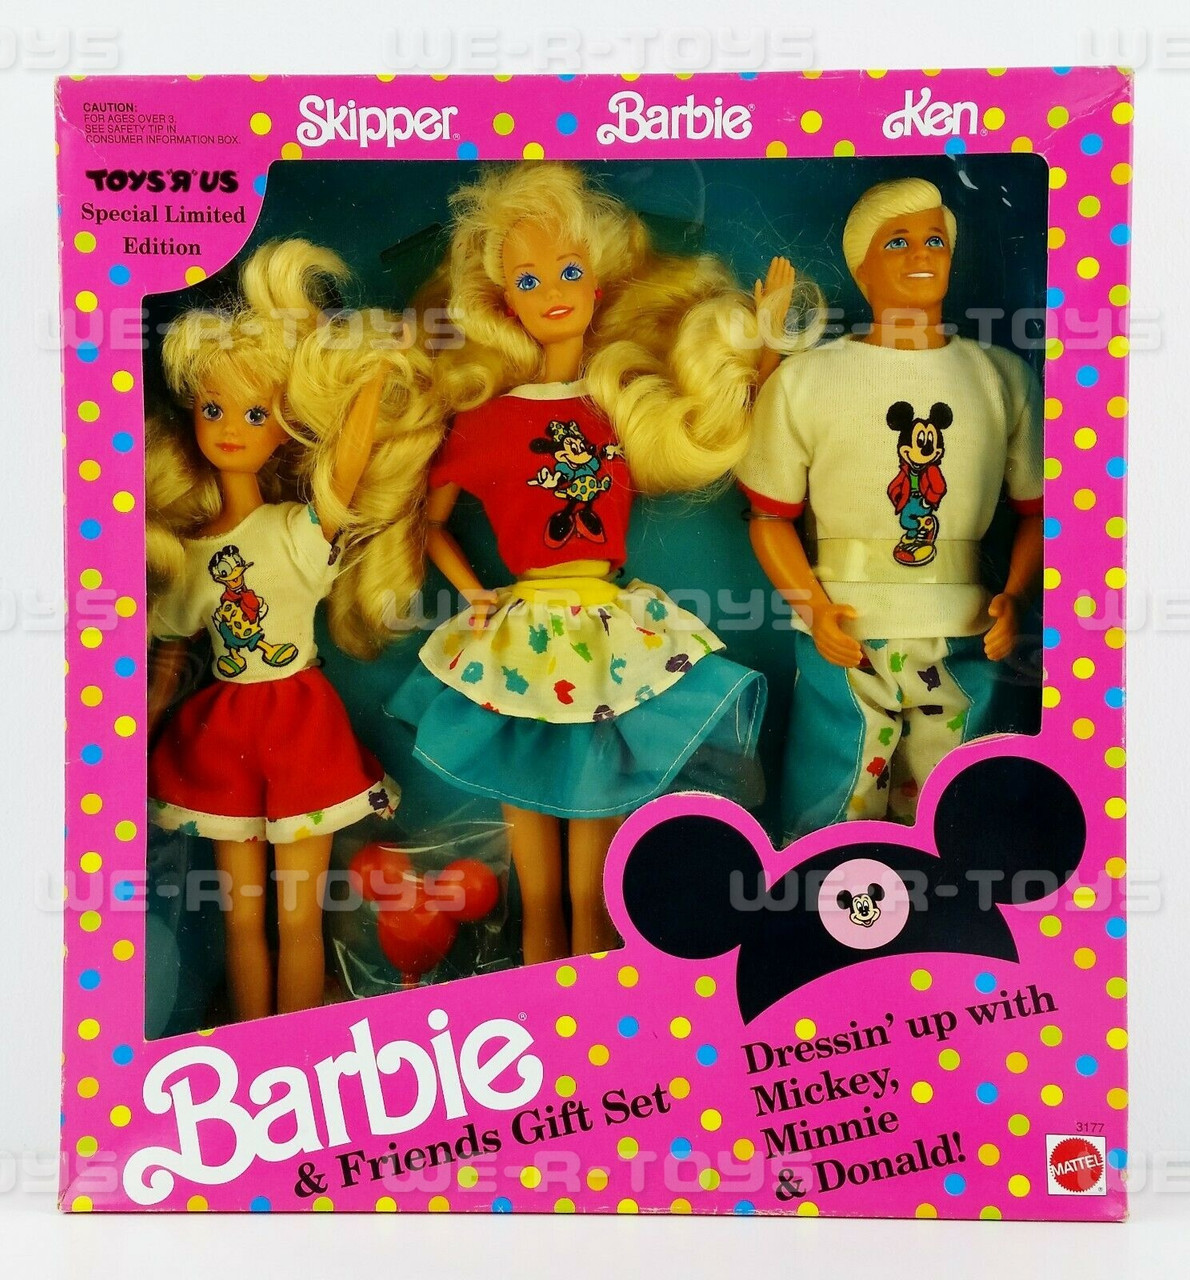 1991 Barbie & Friends Gift Set Dressin' up with Mickey, Minnie & Donal –  Sell4Value